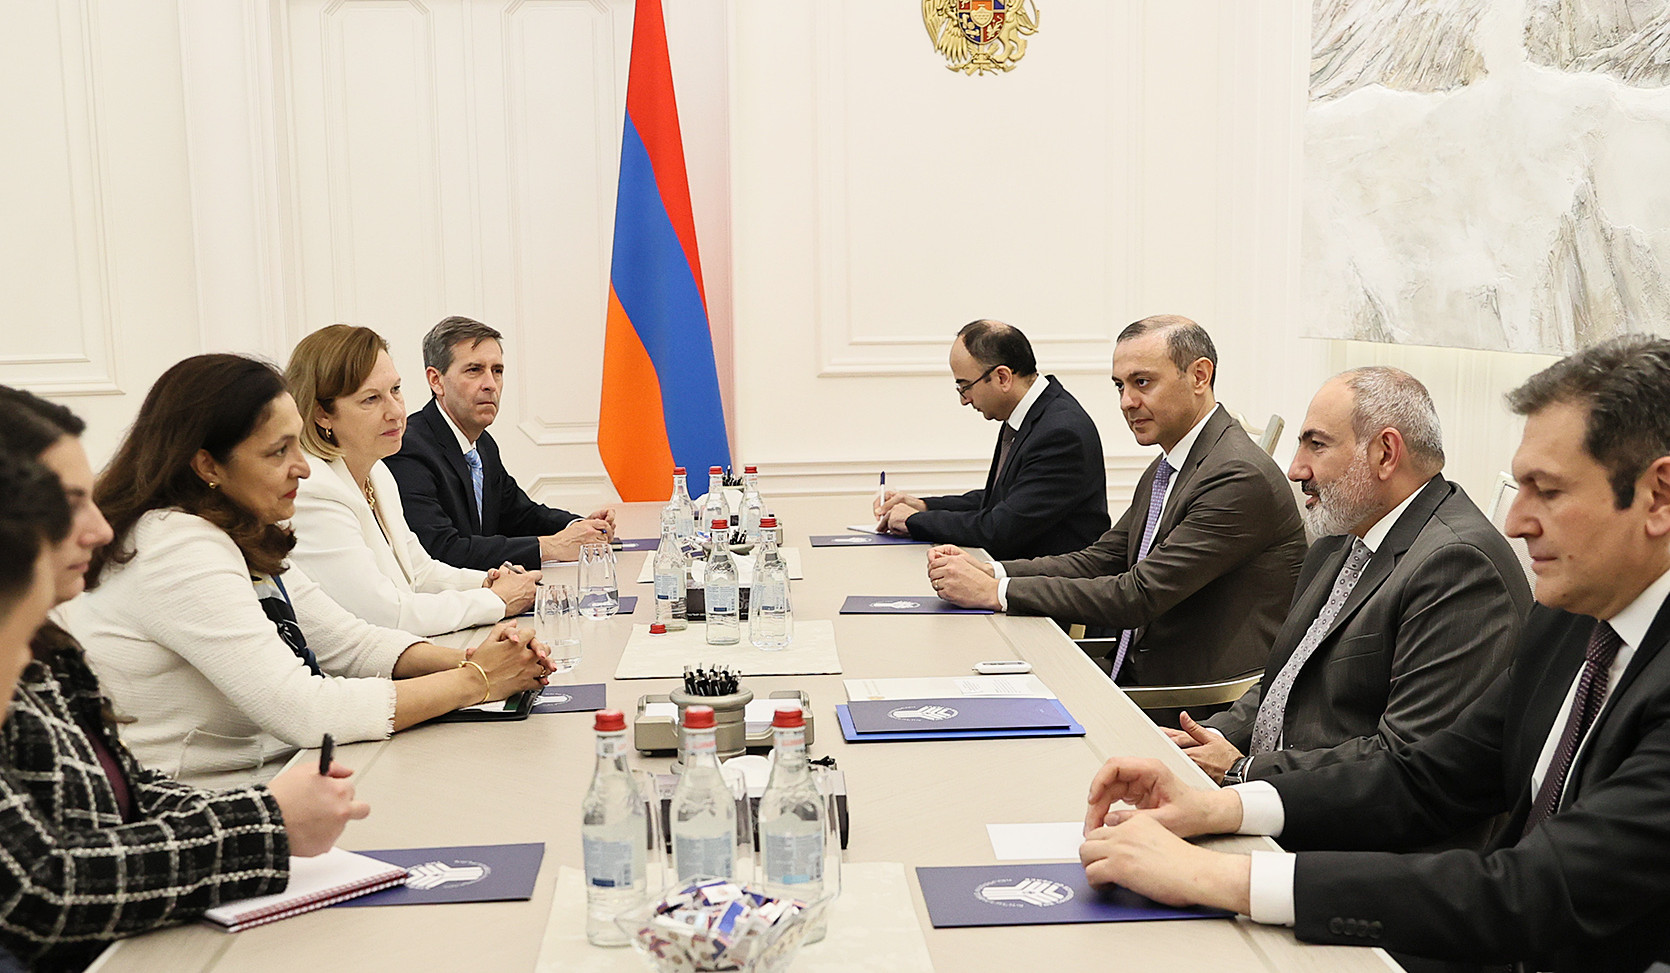 Meeting between Armenia's Prime Minister and US Deputy Secretary of State discussed peace process between Armenia and Azerbaijan